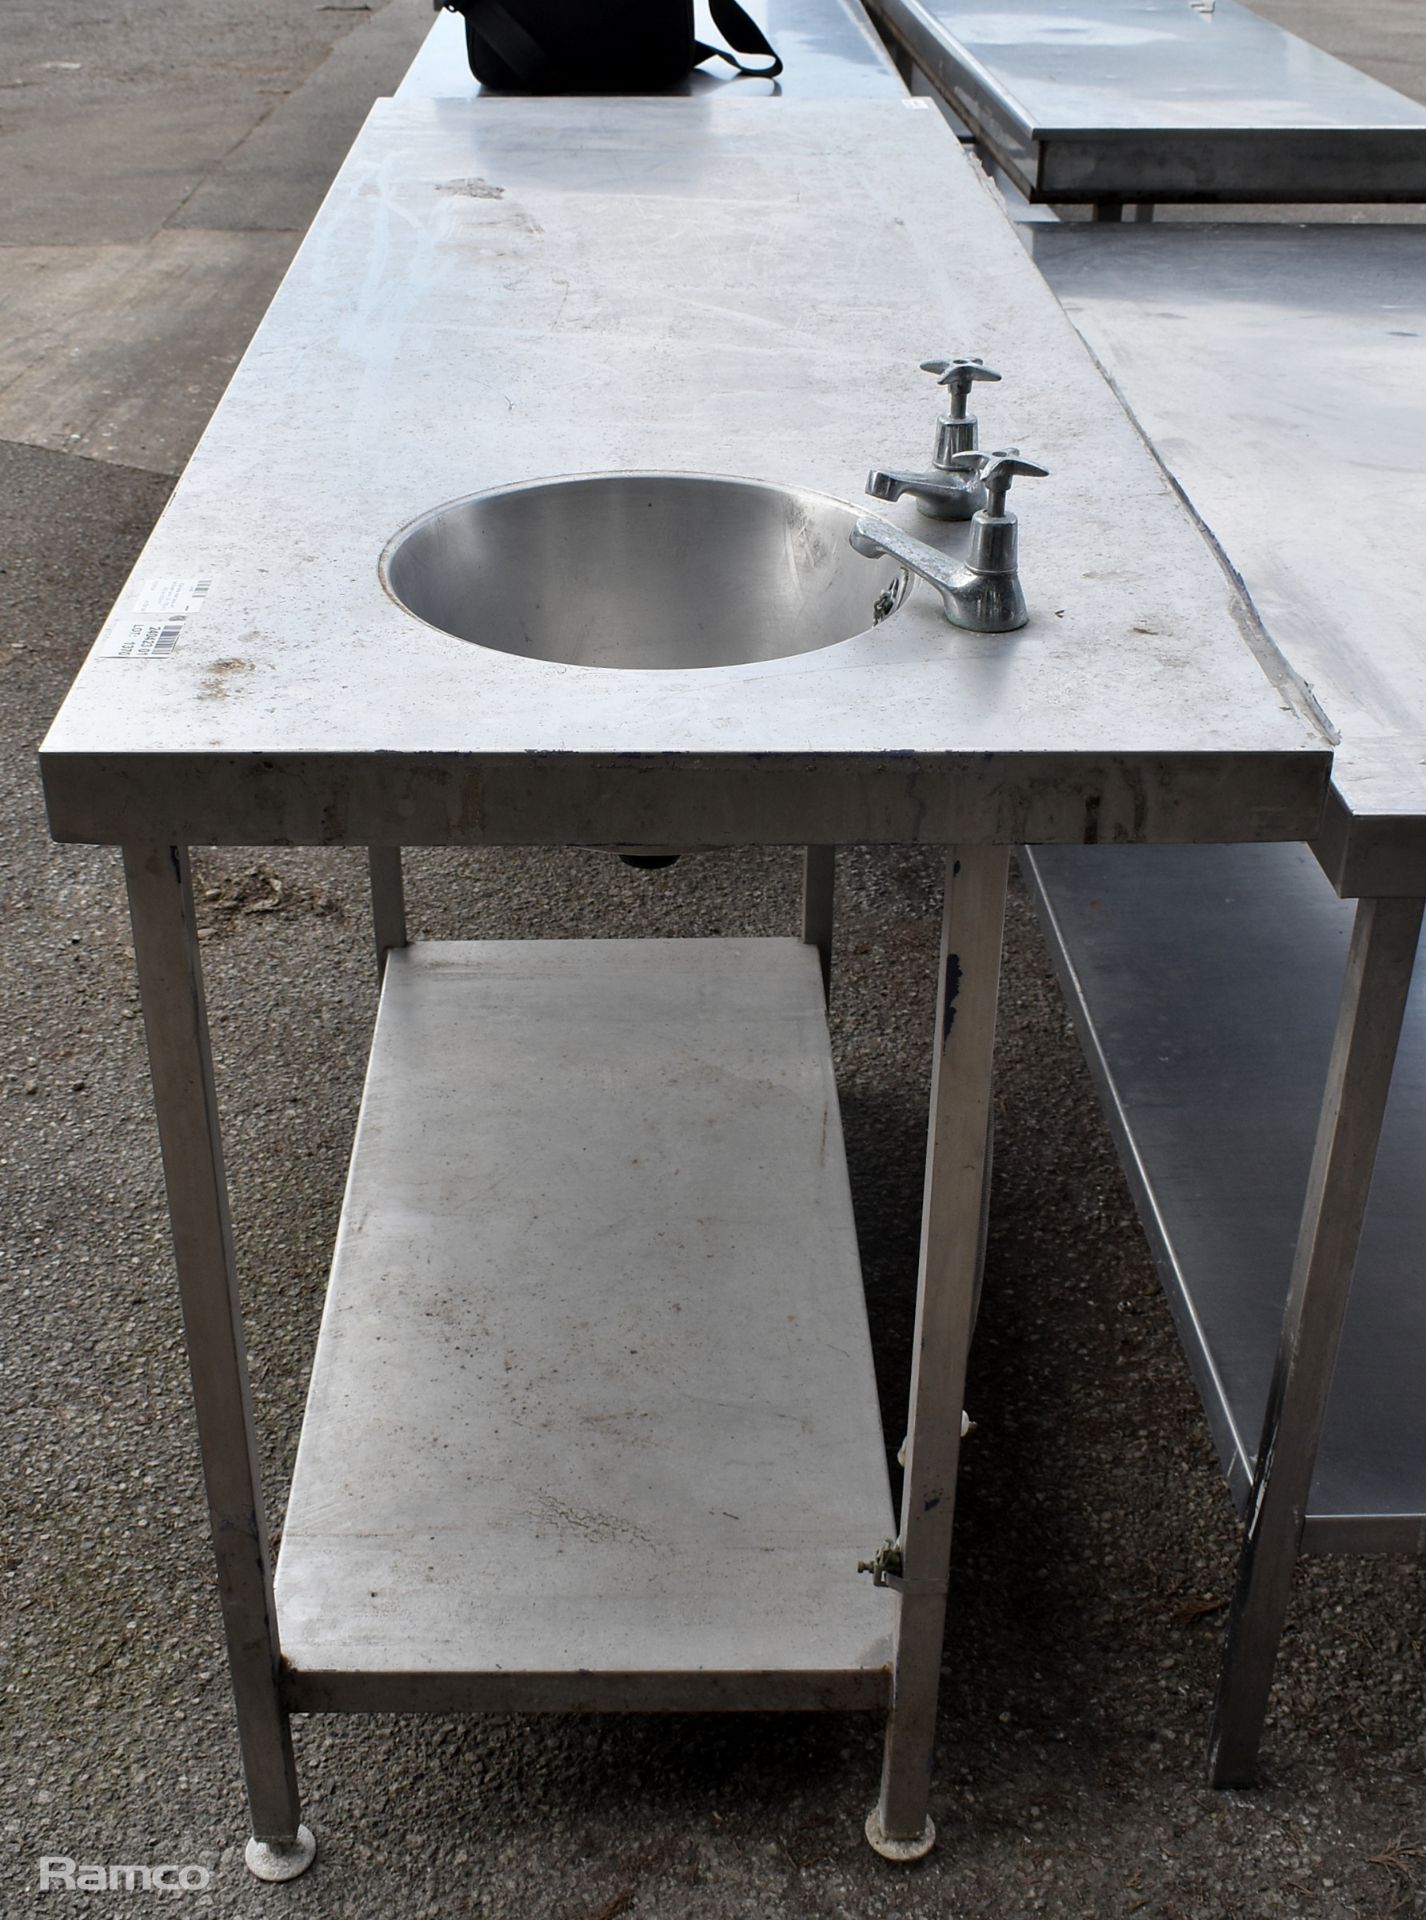 Stainless steel table with handwash sink - W 1750 x D 660 x H 900mm - Image 4 of 4